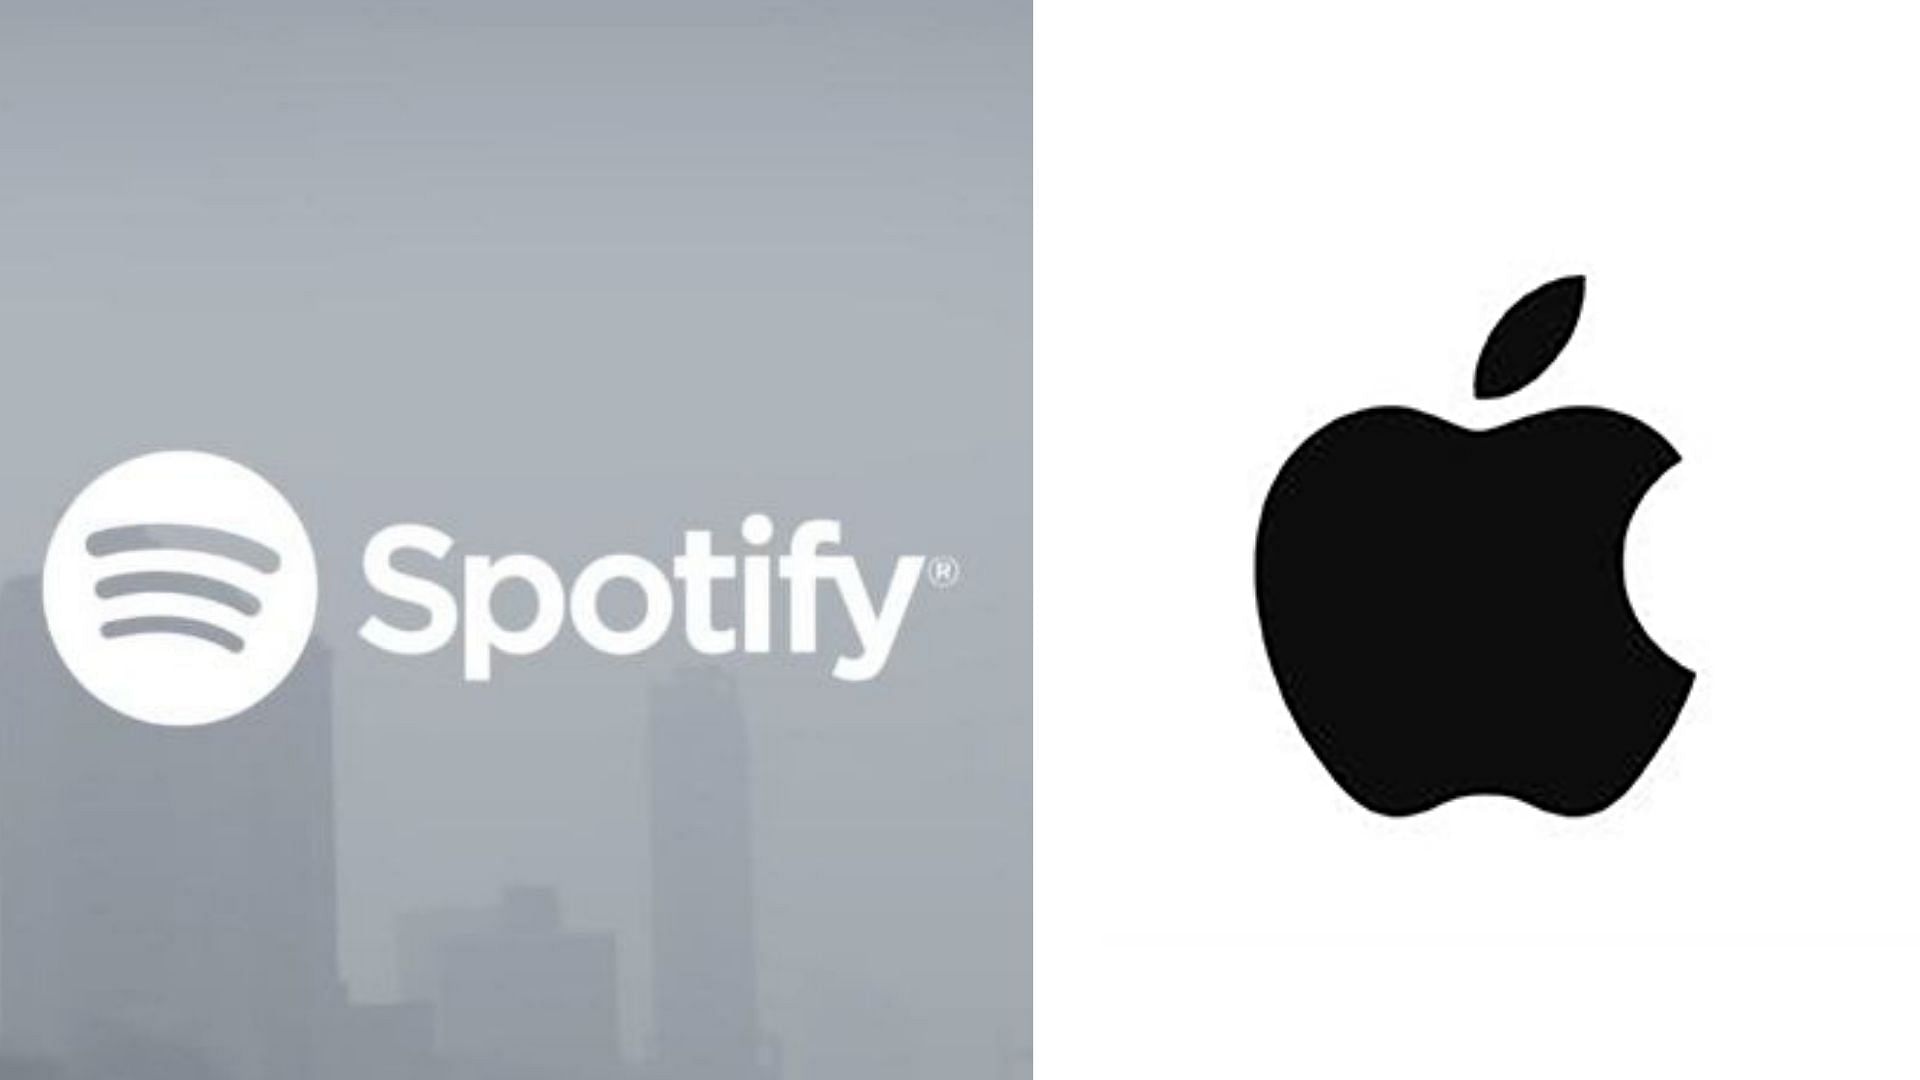 Rejecting Spotify’s assertions, Apple argued that Spotify was really driven by “financial motivations”.